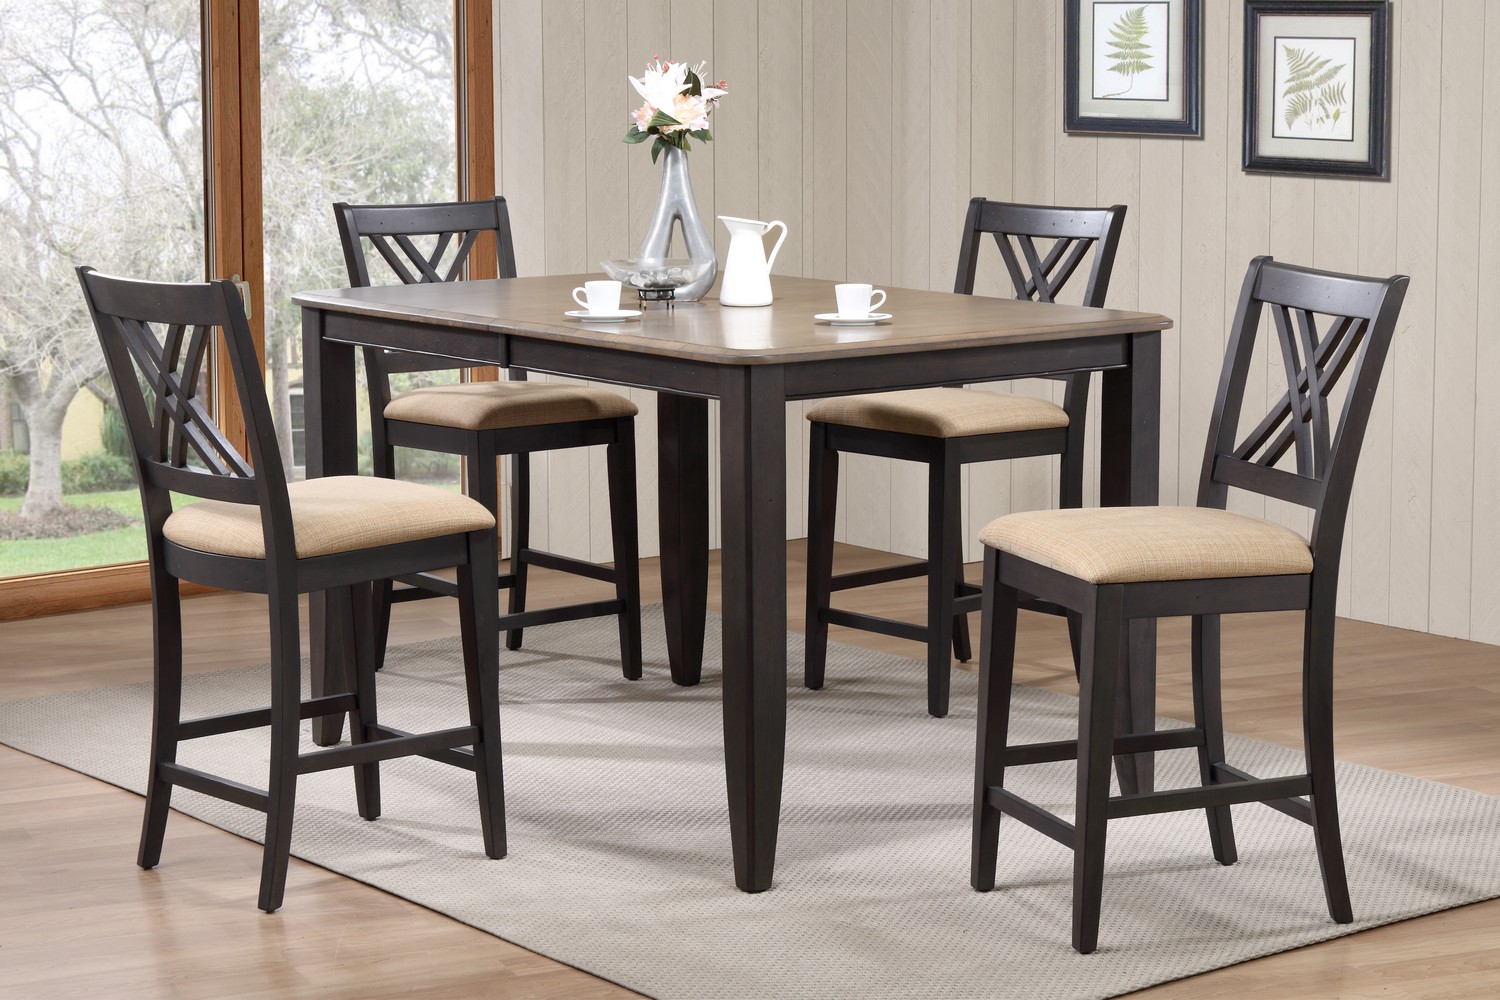 Iconic Furniture RT78 Grey Stone/Black Stone Double X- Back Counter Height Dining Set